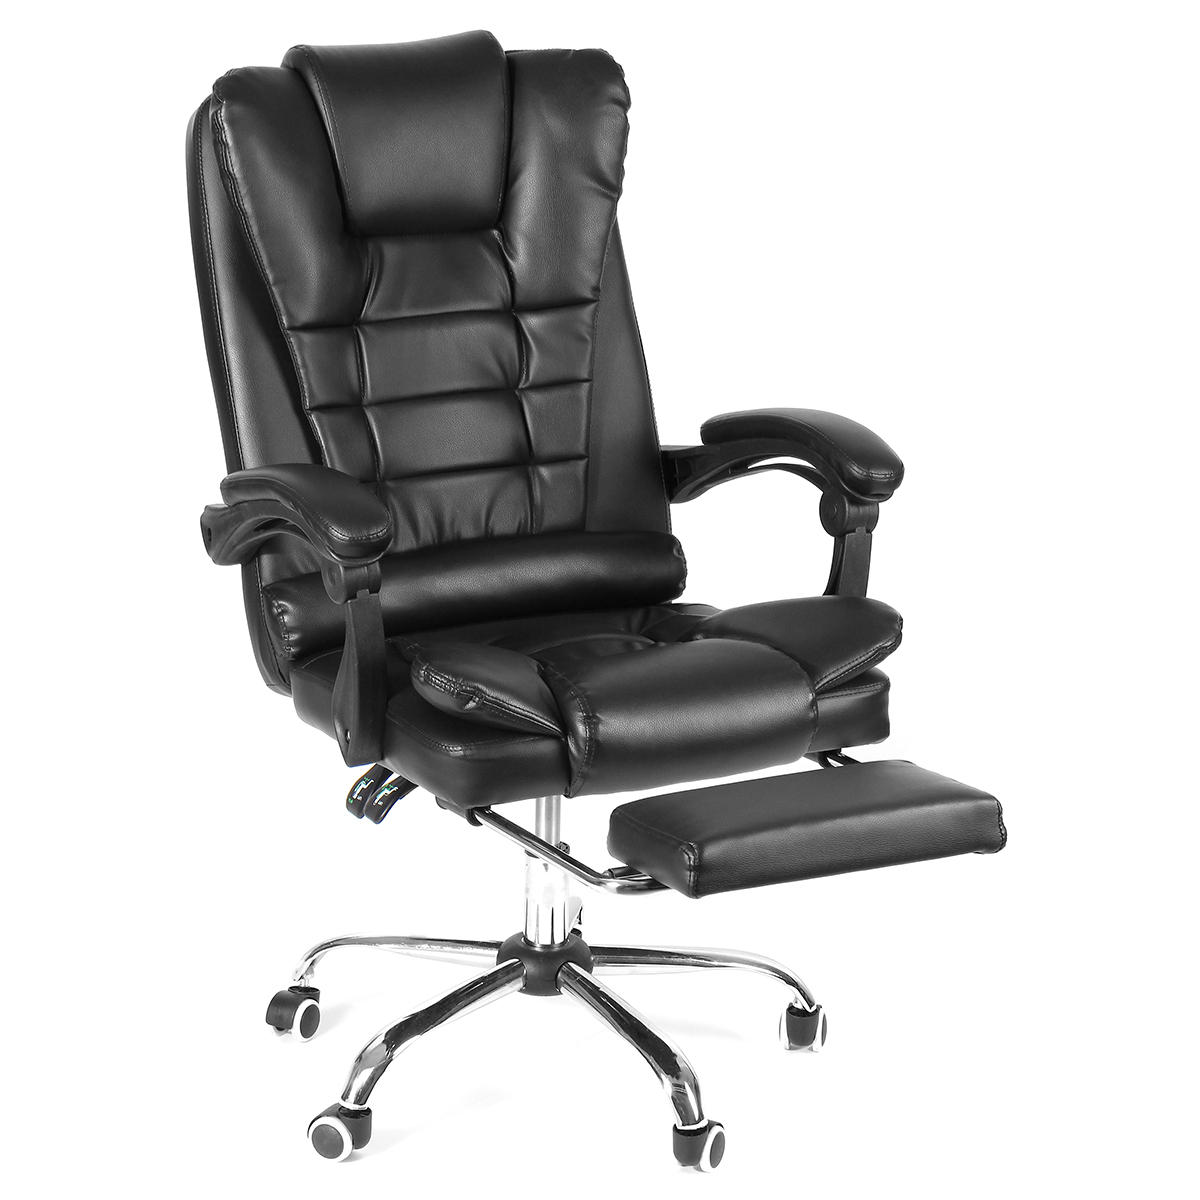 Image of Hoffree Ergonomic High Back Reclining Office Chair Adjustable Height Rotating Lift Chair PU Leather Gaming Chair Laptop